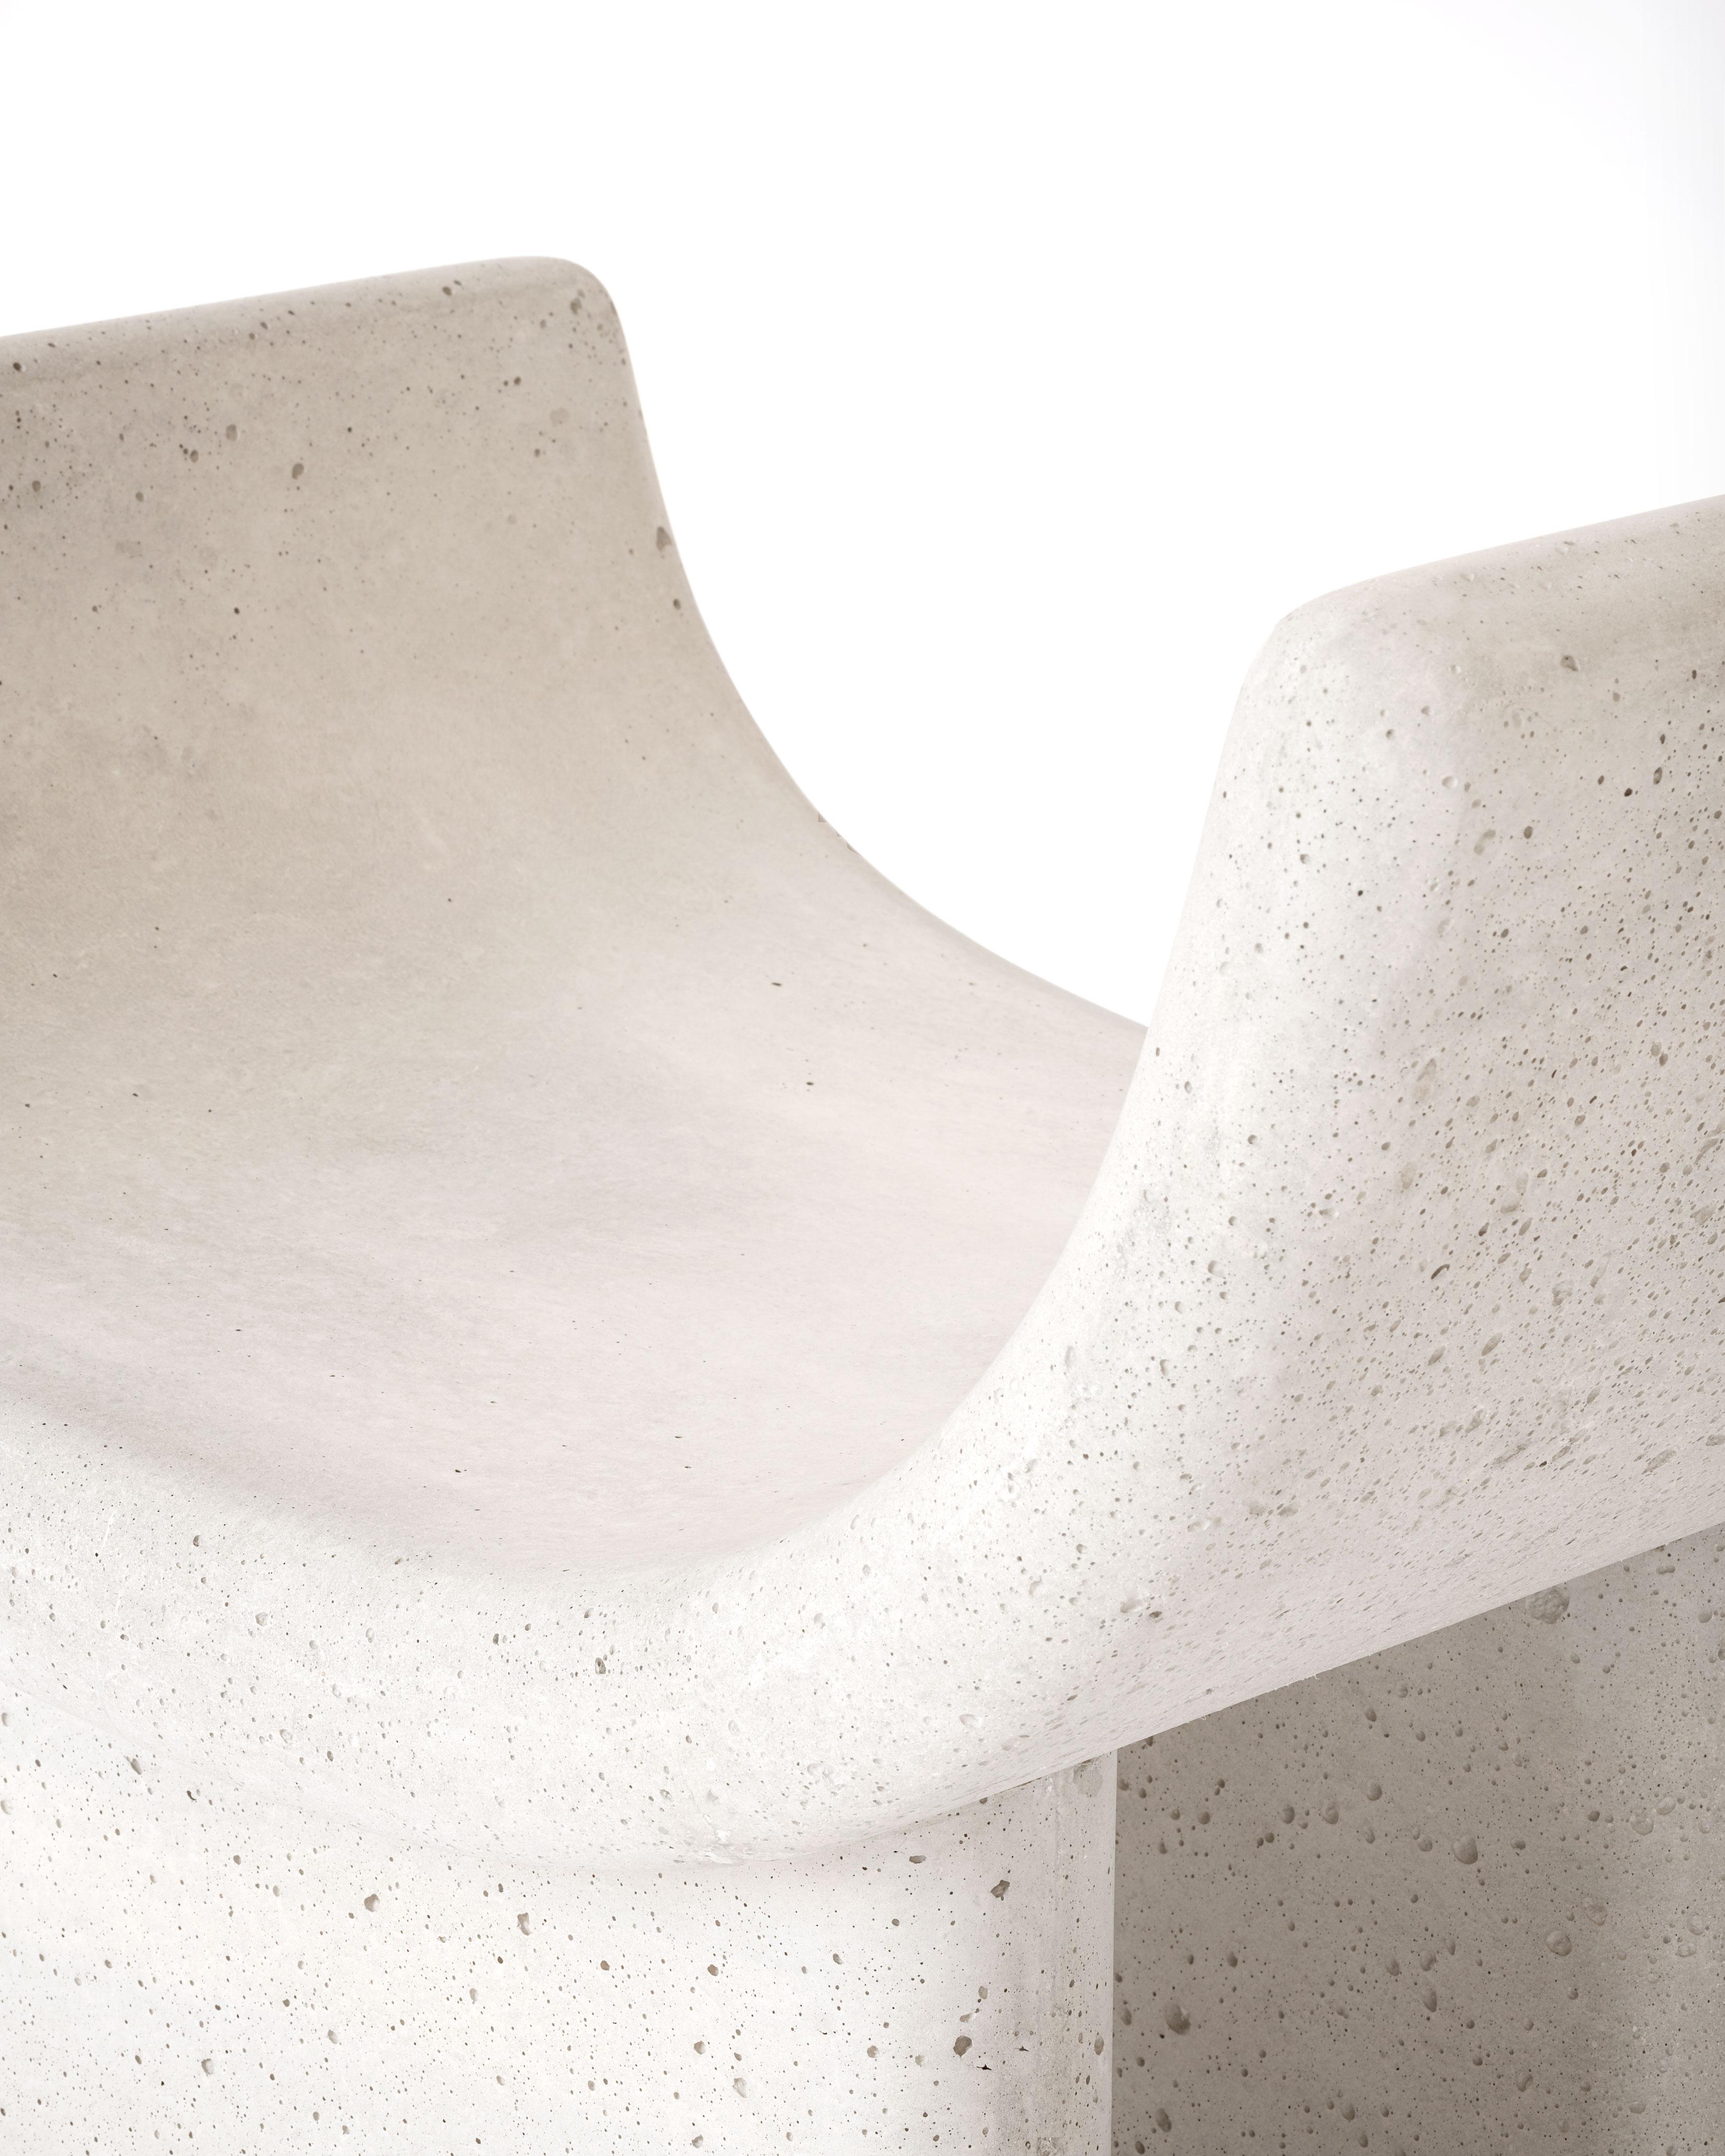 Monolithic chair 1 by Studiopepe
Dimensions: W 80 x D 50 x H 76 cm
Materials: Concrete

Multifaceted design agency Studiopepe was founded in Milan in 2006. Eclectic, voguish, it is the
brainchild of Chiara di Pinto and Arianna Lelli Mami, both